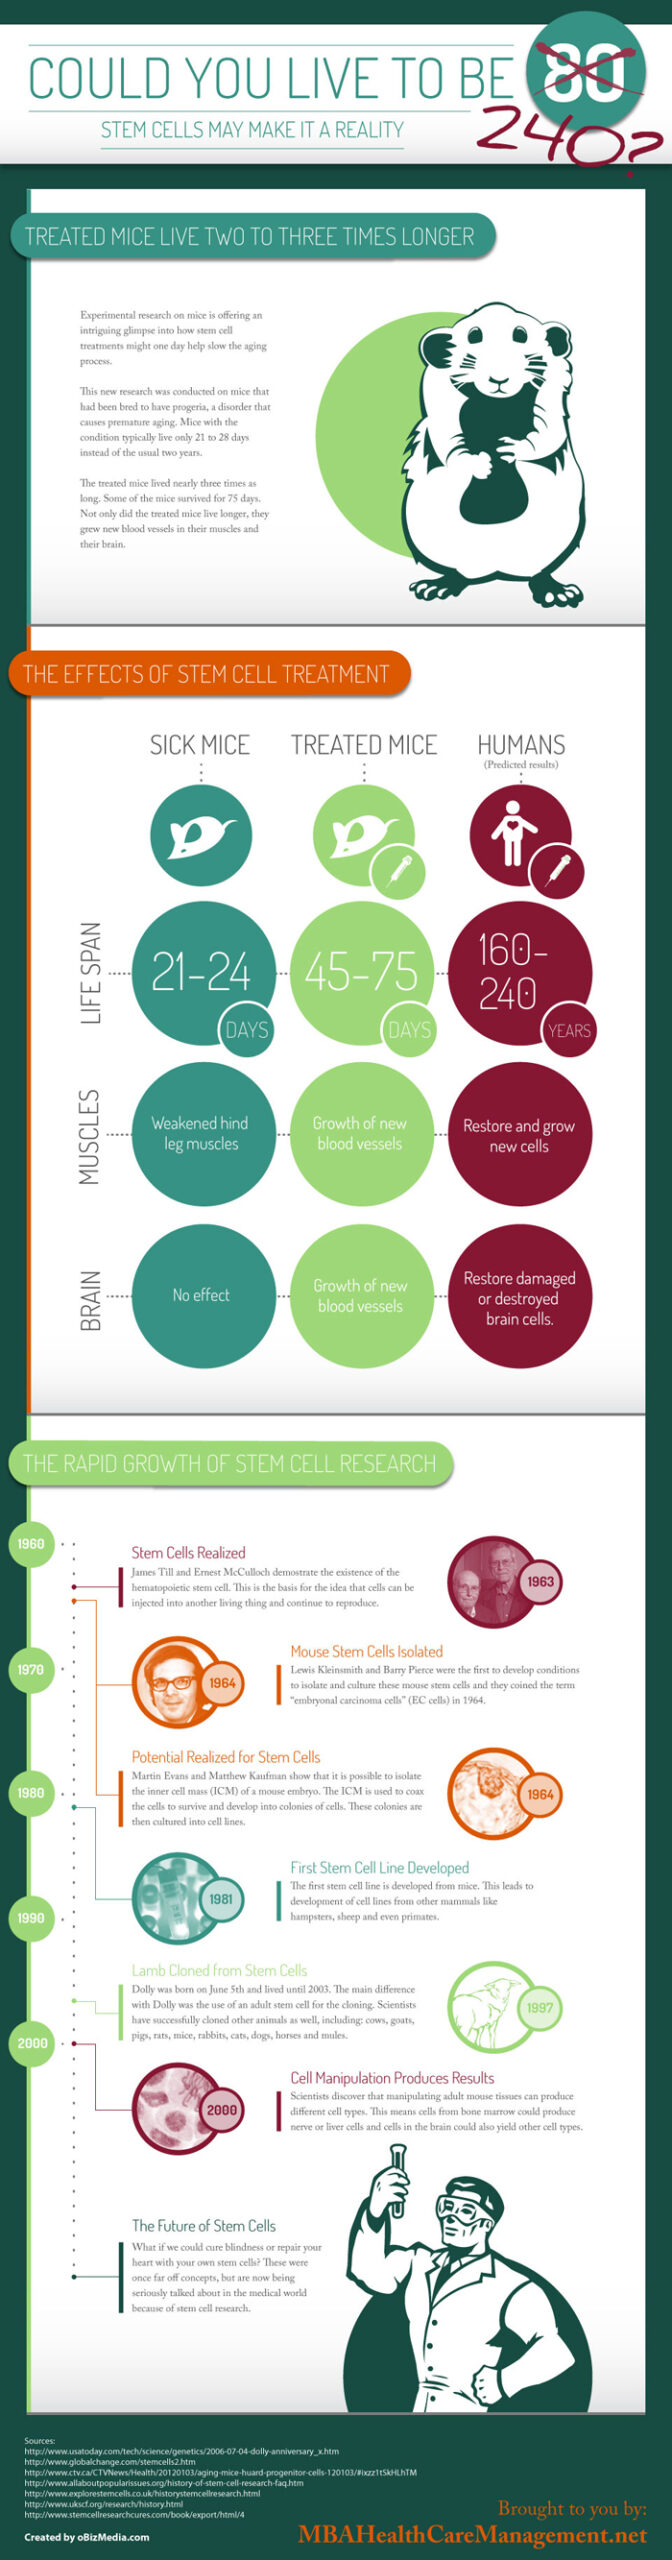 R3 Stem Cell | Infographic  The Basics of Amniotic and Umbilical Stem Cell Therapy | R3 Stem Cell